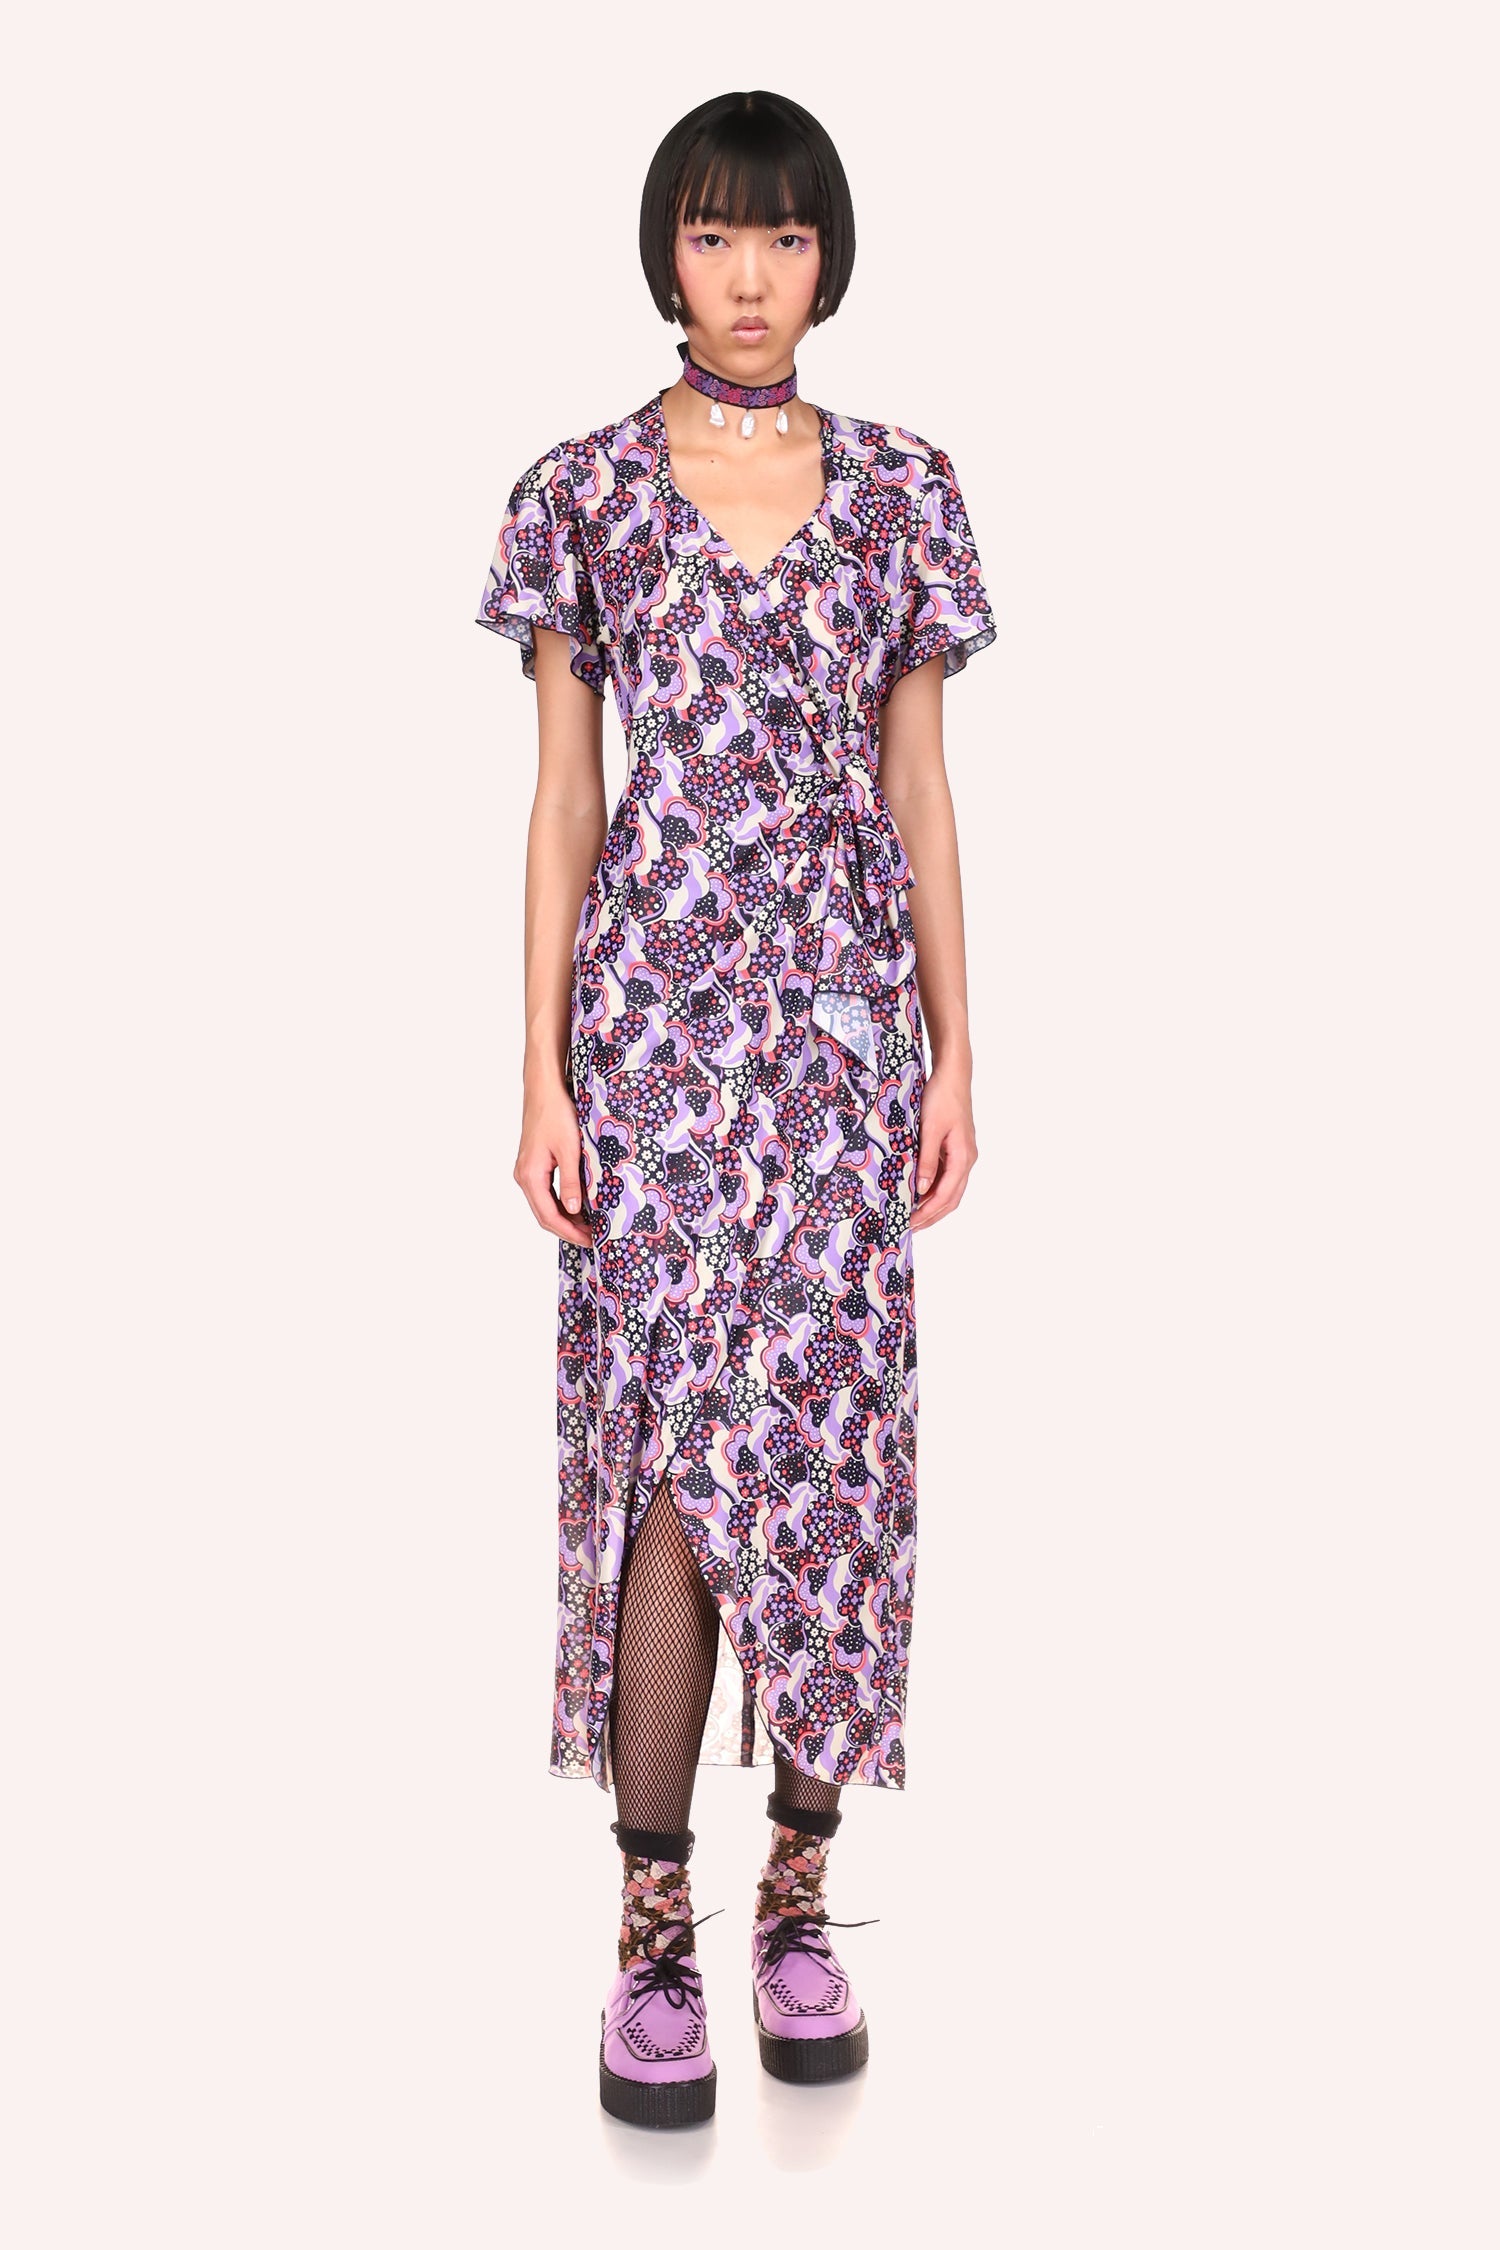 Wavy Clouds Wrap Dress Lavender front shorter than back, shows a rounded edge under knees